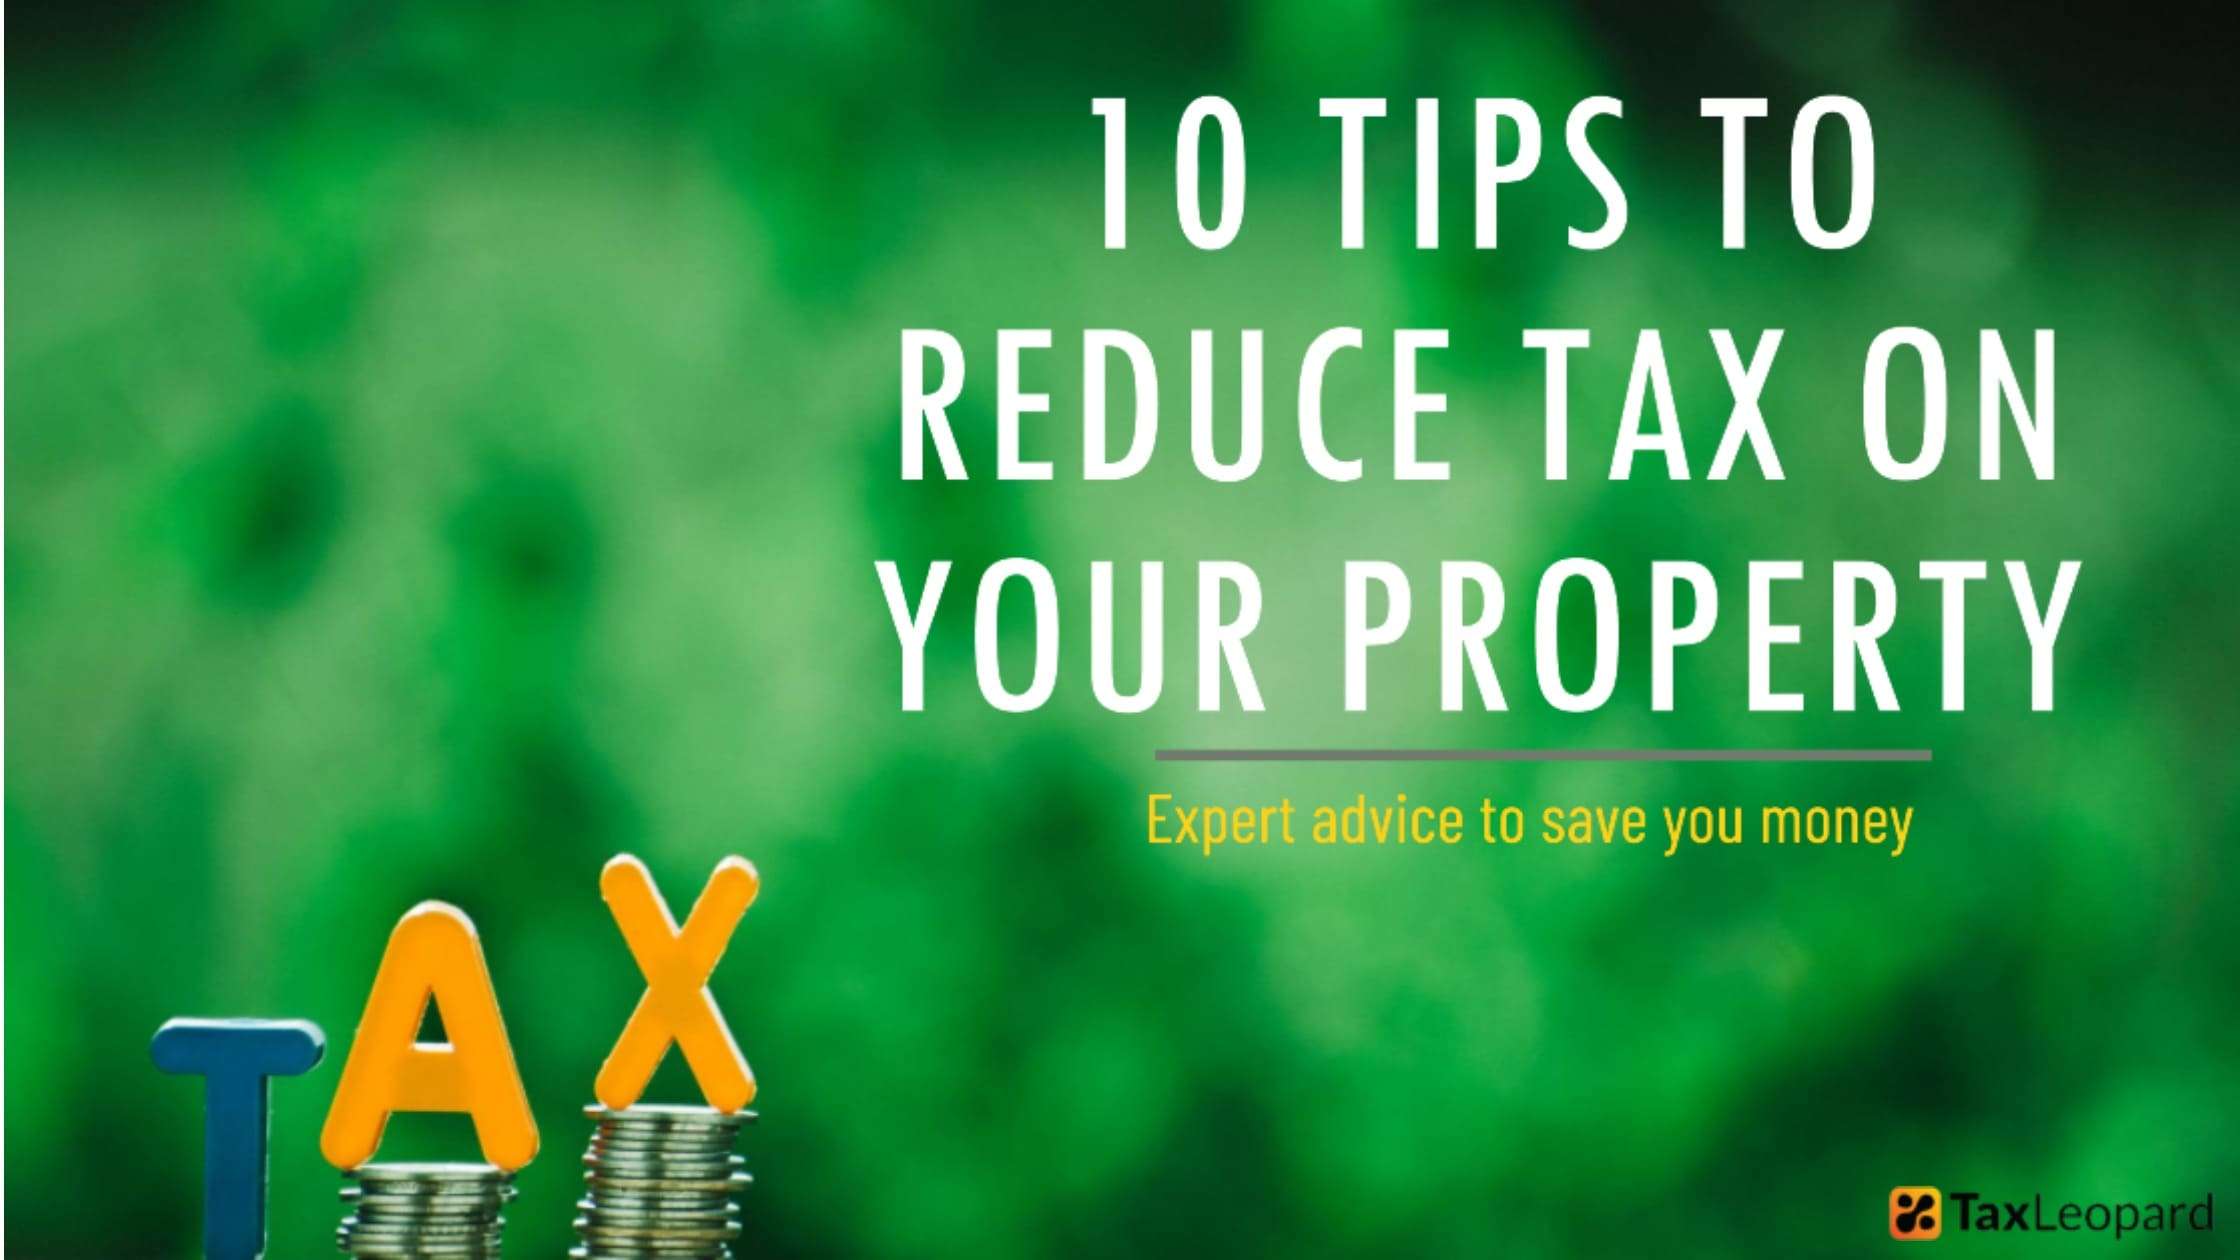 10 Tips to Reduce Tax on Property